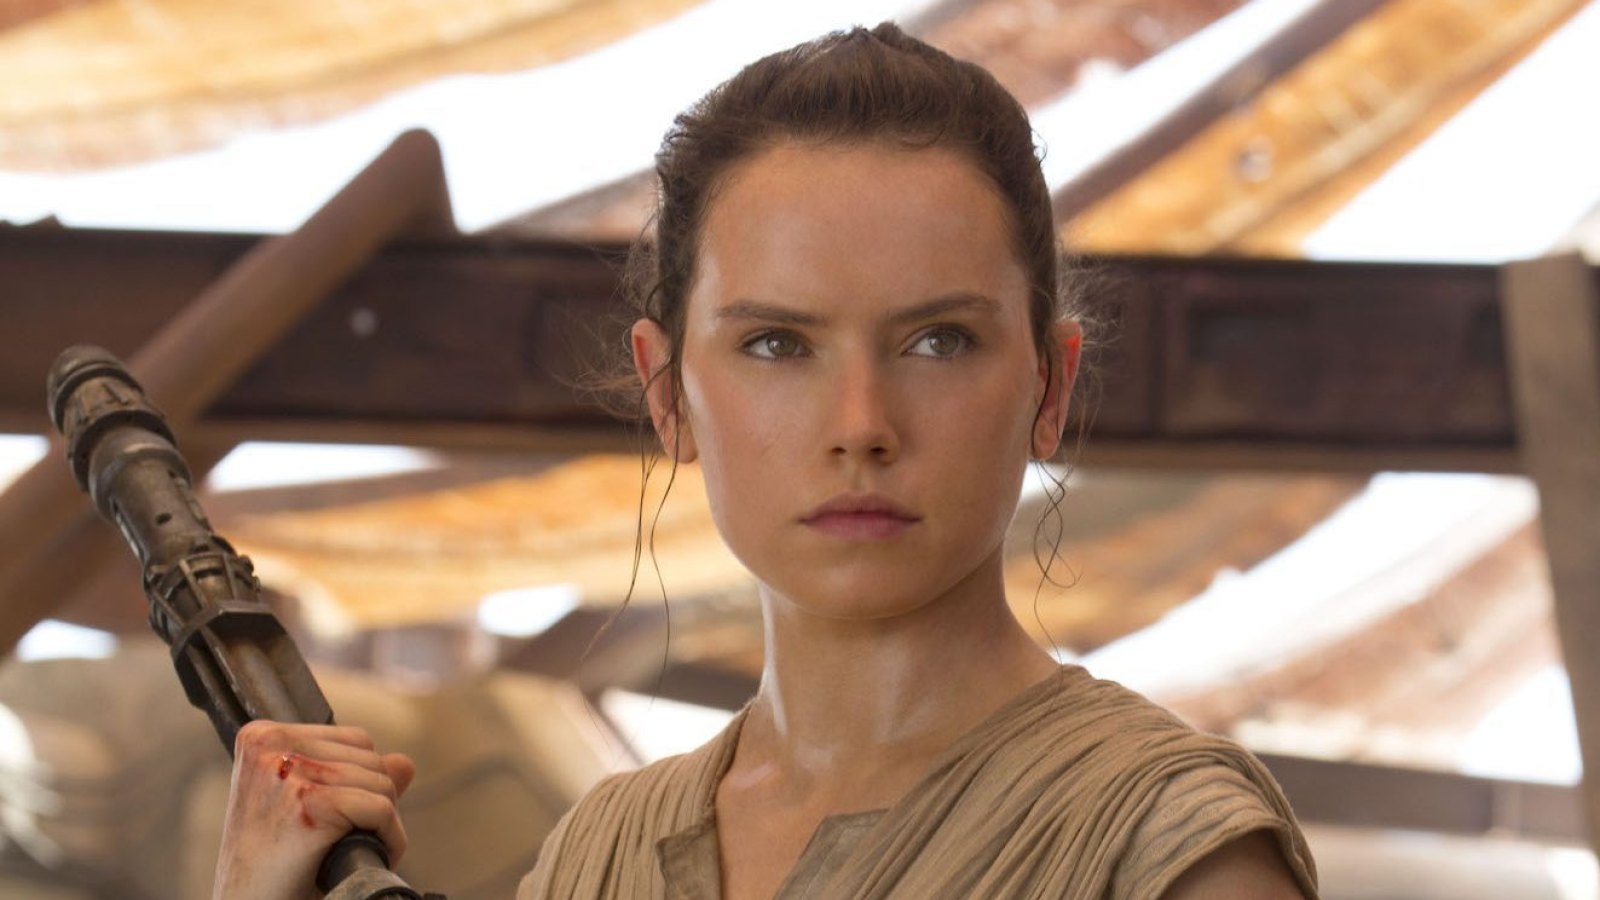 Daisy Ridley Will Reprise Her Role as Rey in New 'Star Wars' Movie Set After 'The Rise of Skywalker'